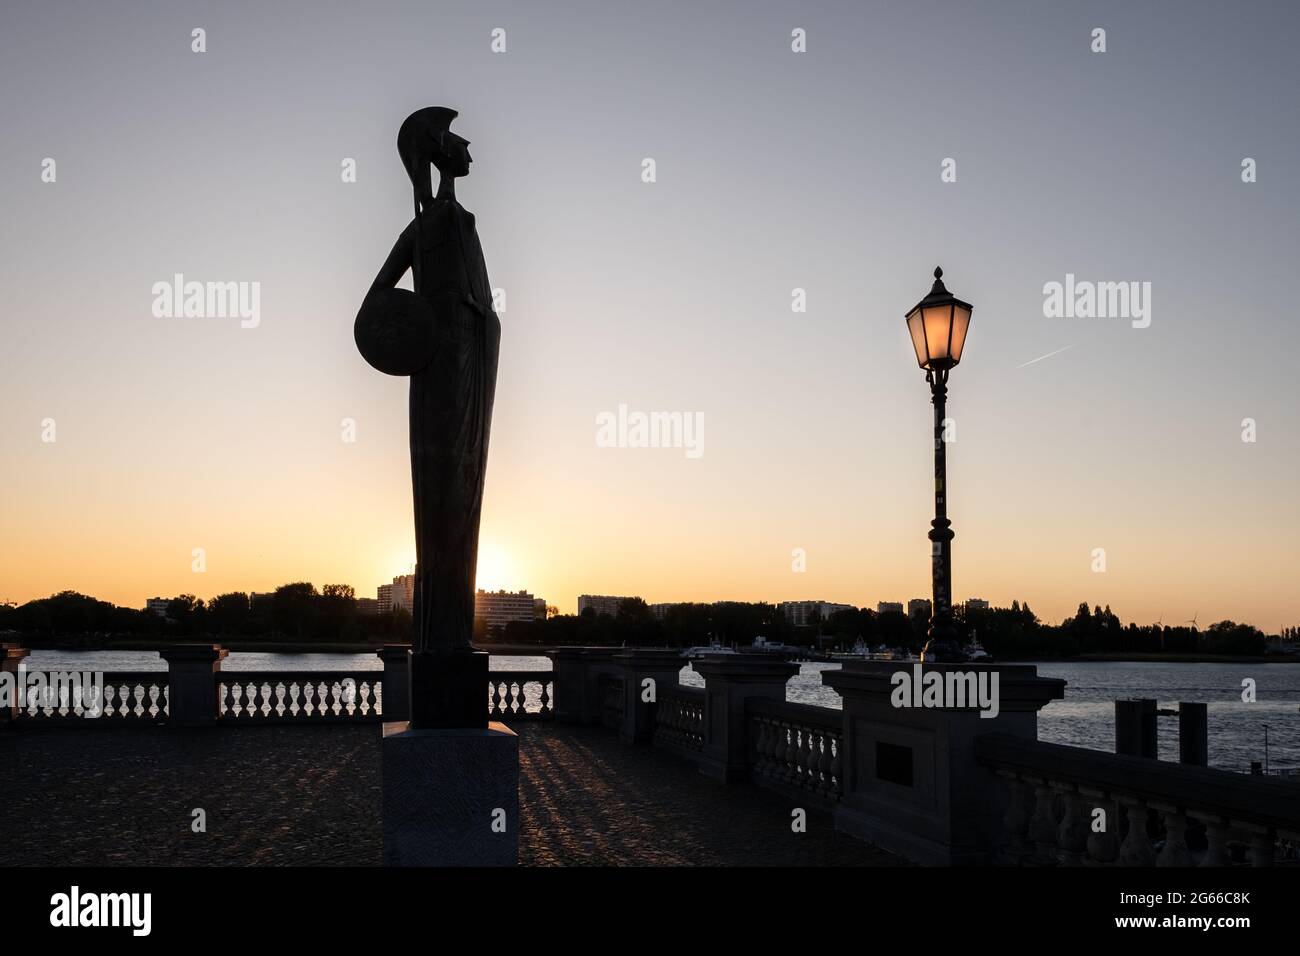 Silhouette of the Minerva Statue and a lamp post in the center of Antwerp, Belgium. Minerva was the Roman Goddess of wisdom and strategic warfare. Stock Photo